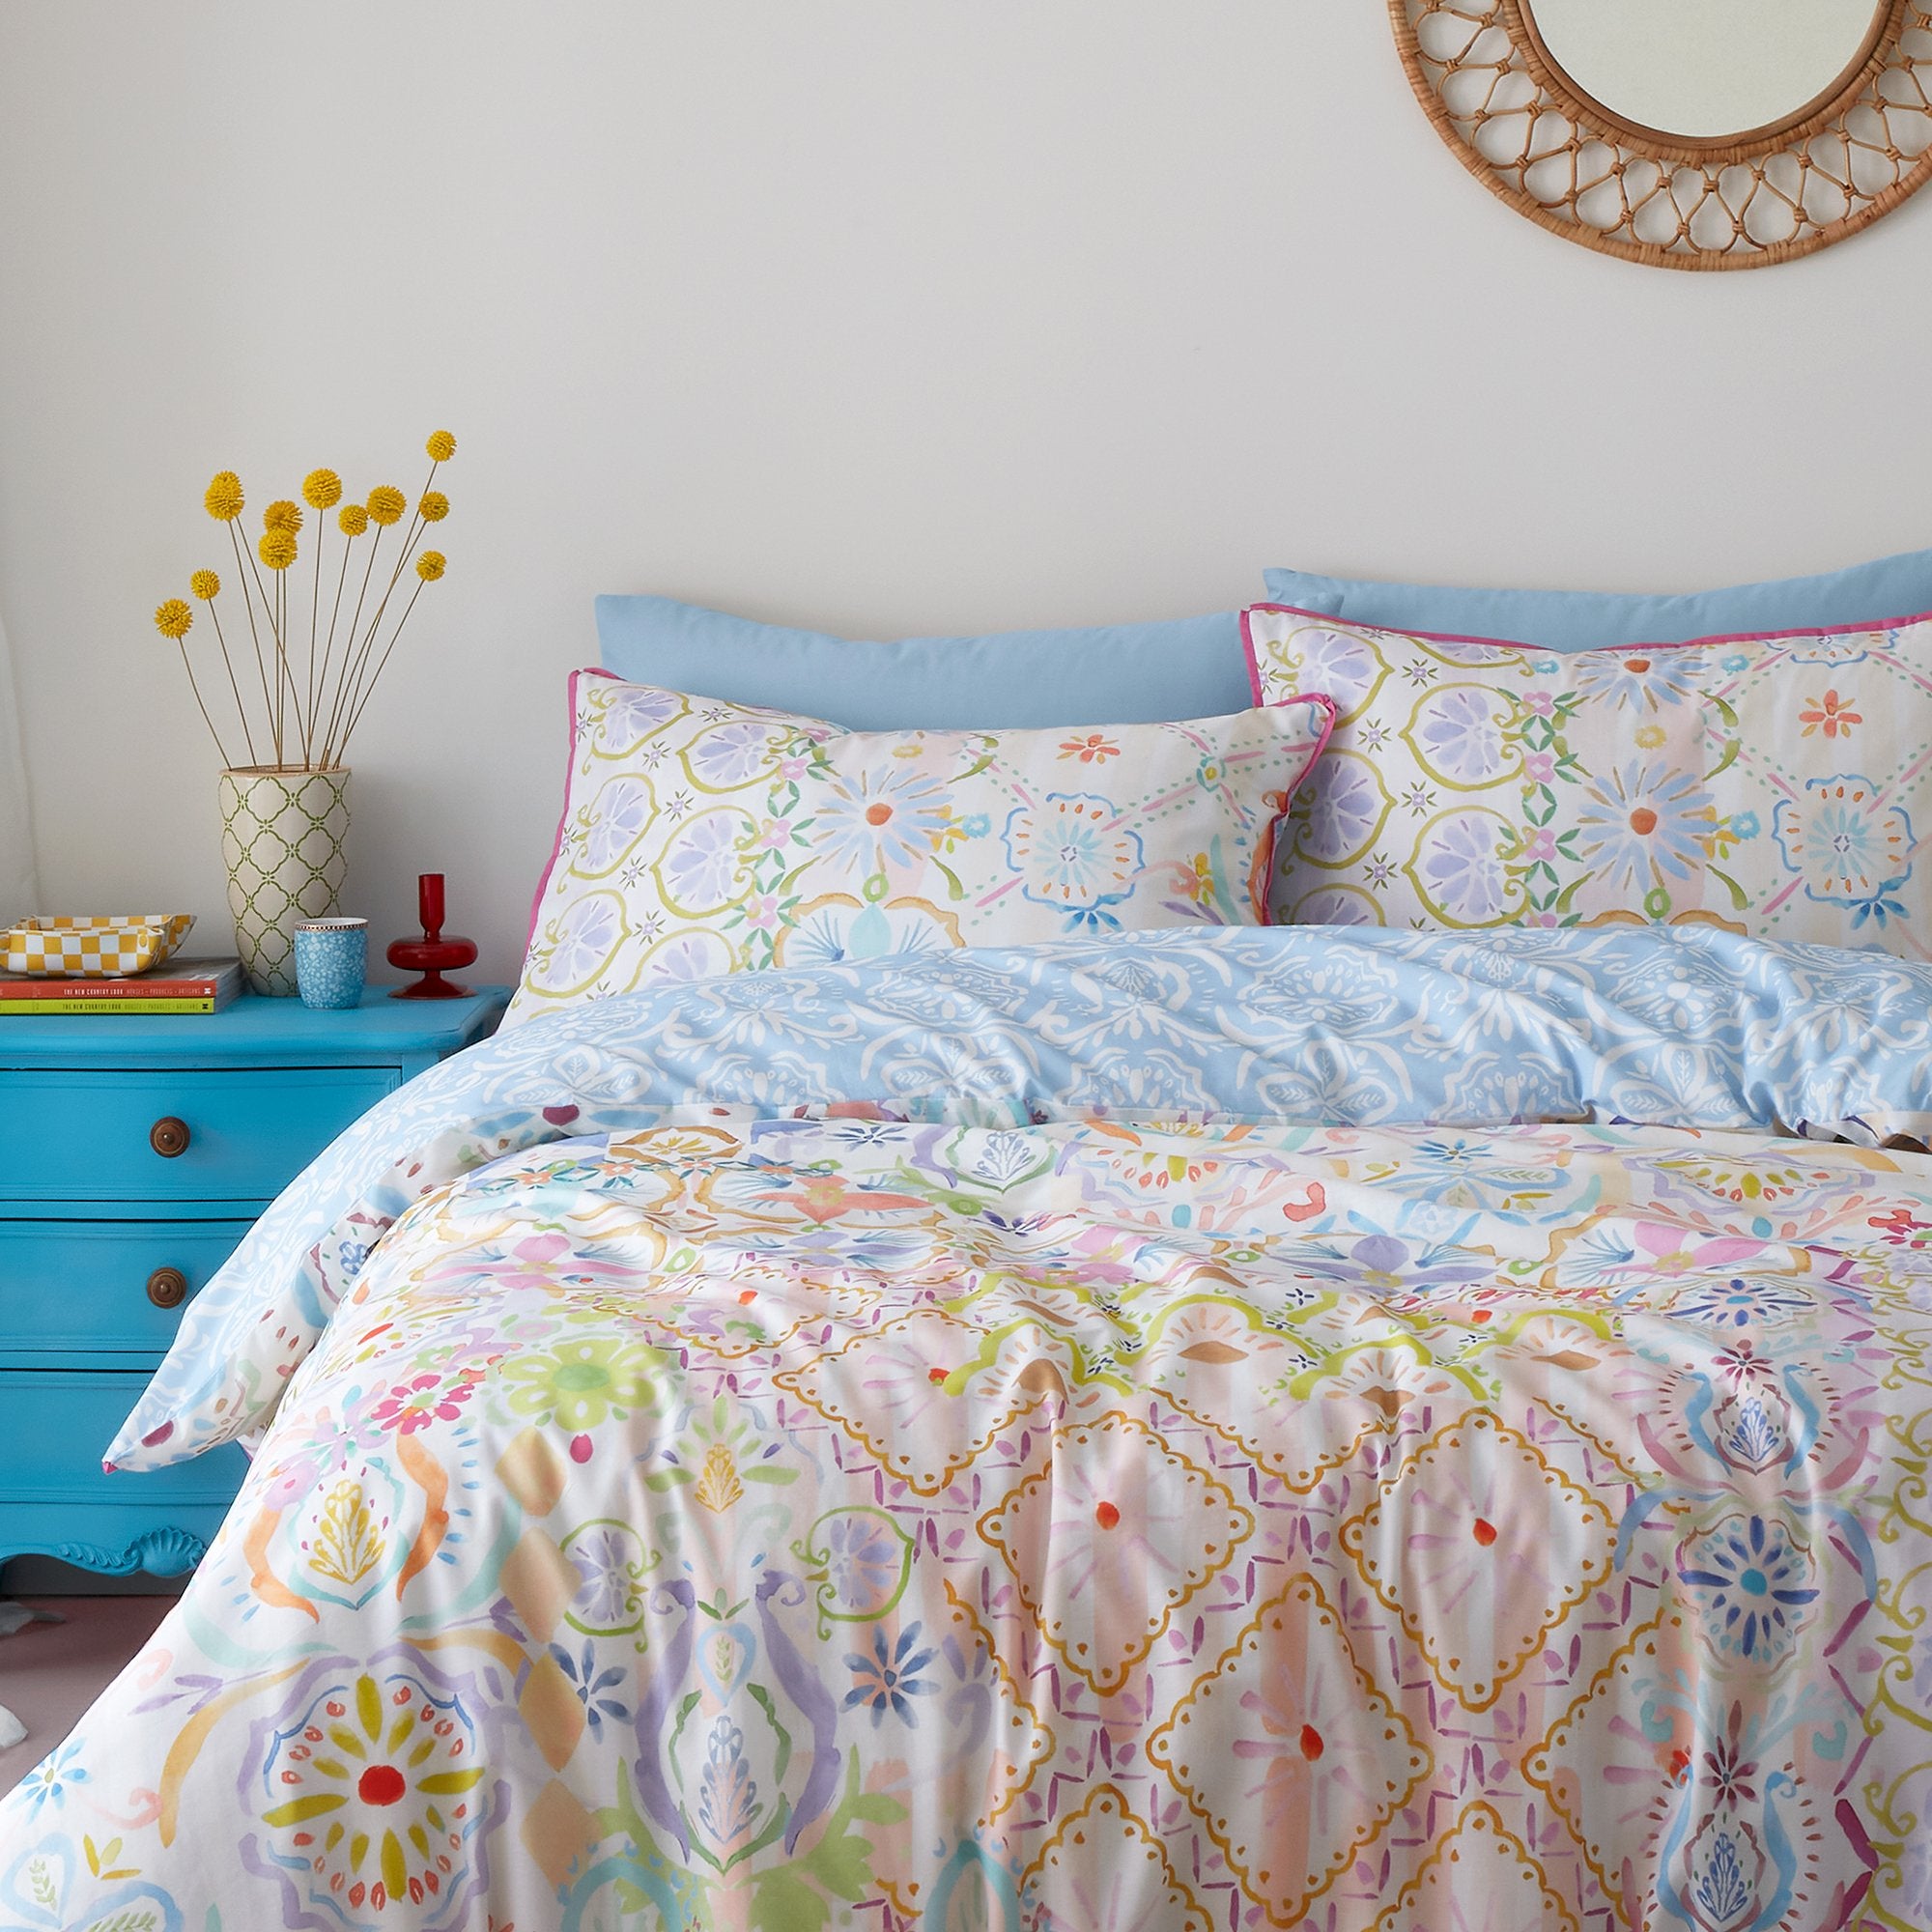 Duvet Cover Set Casablanca by Appletree Style in Multi